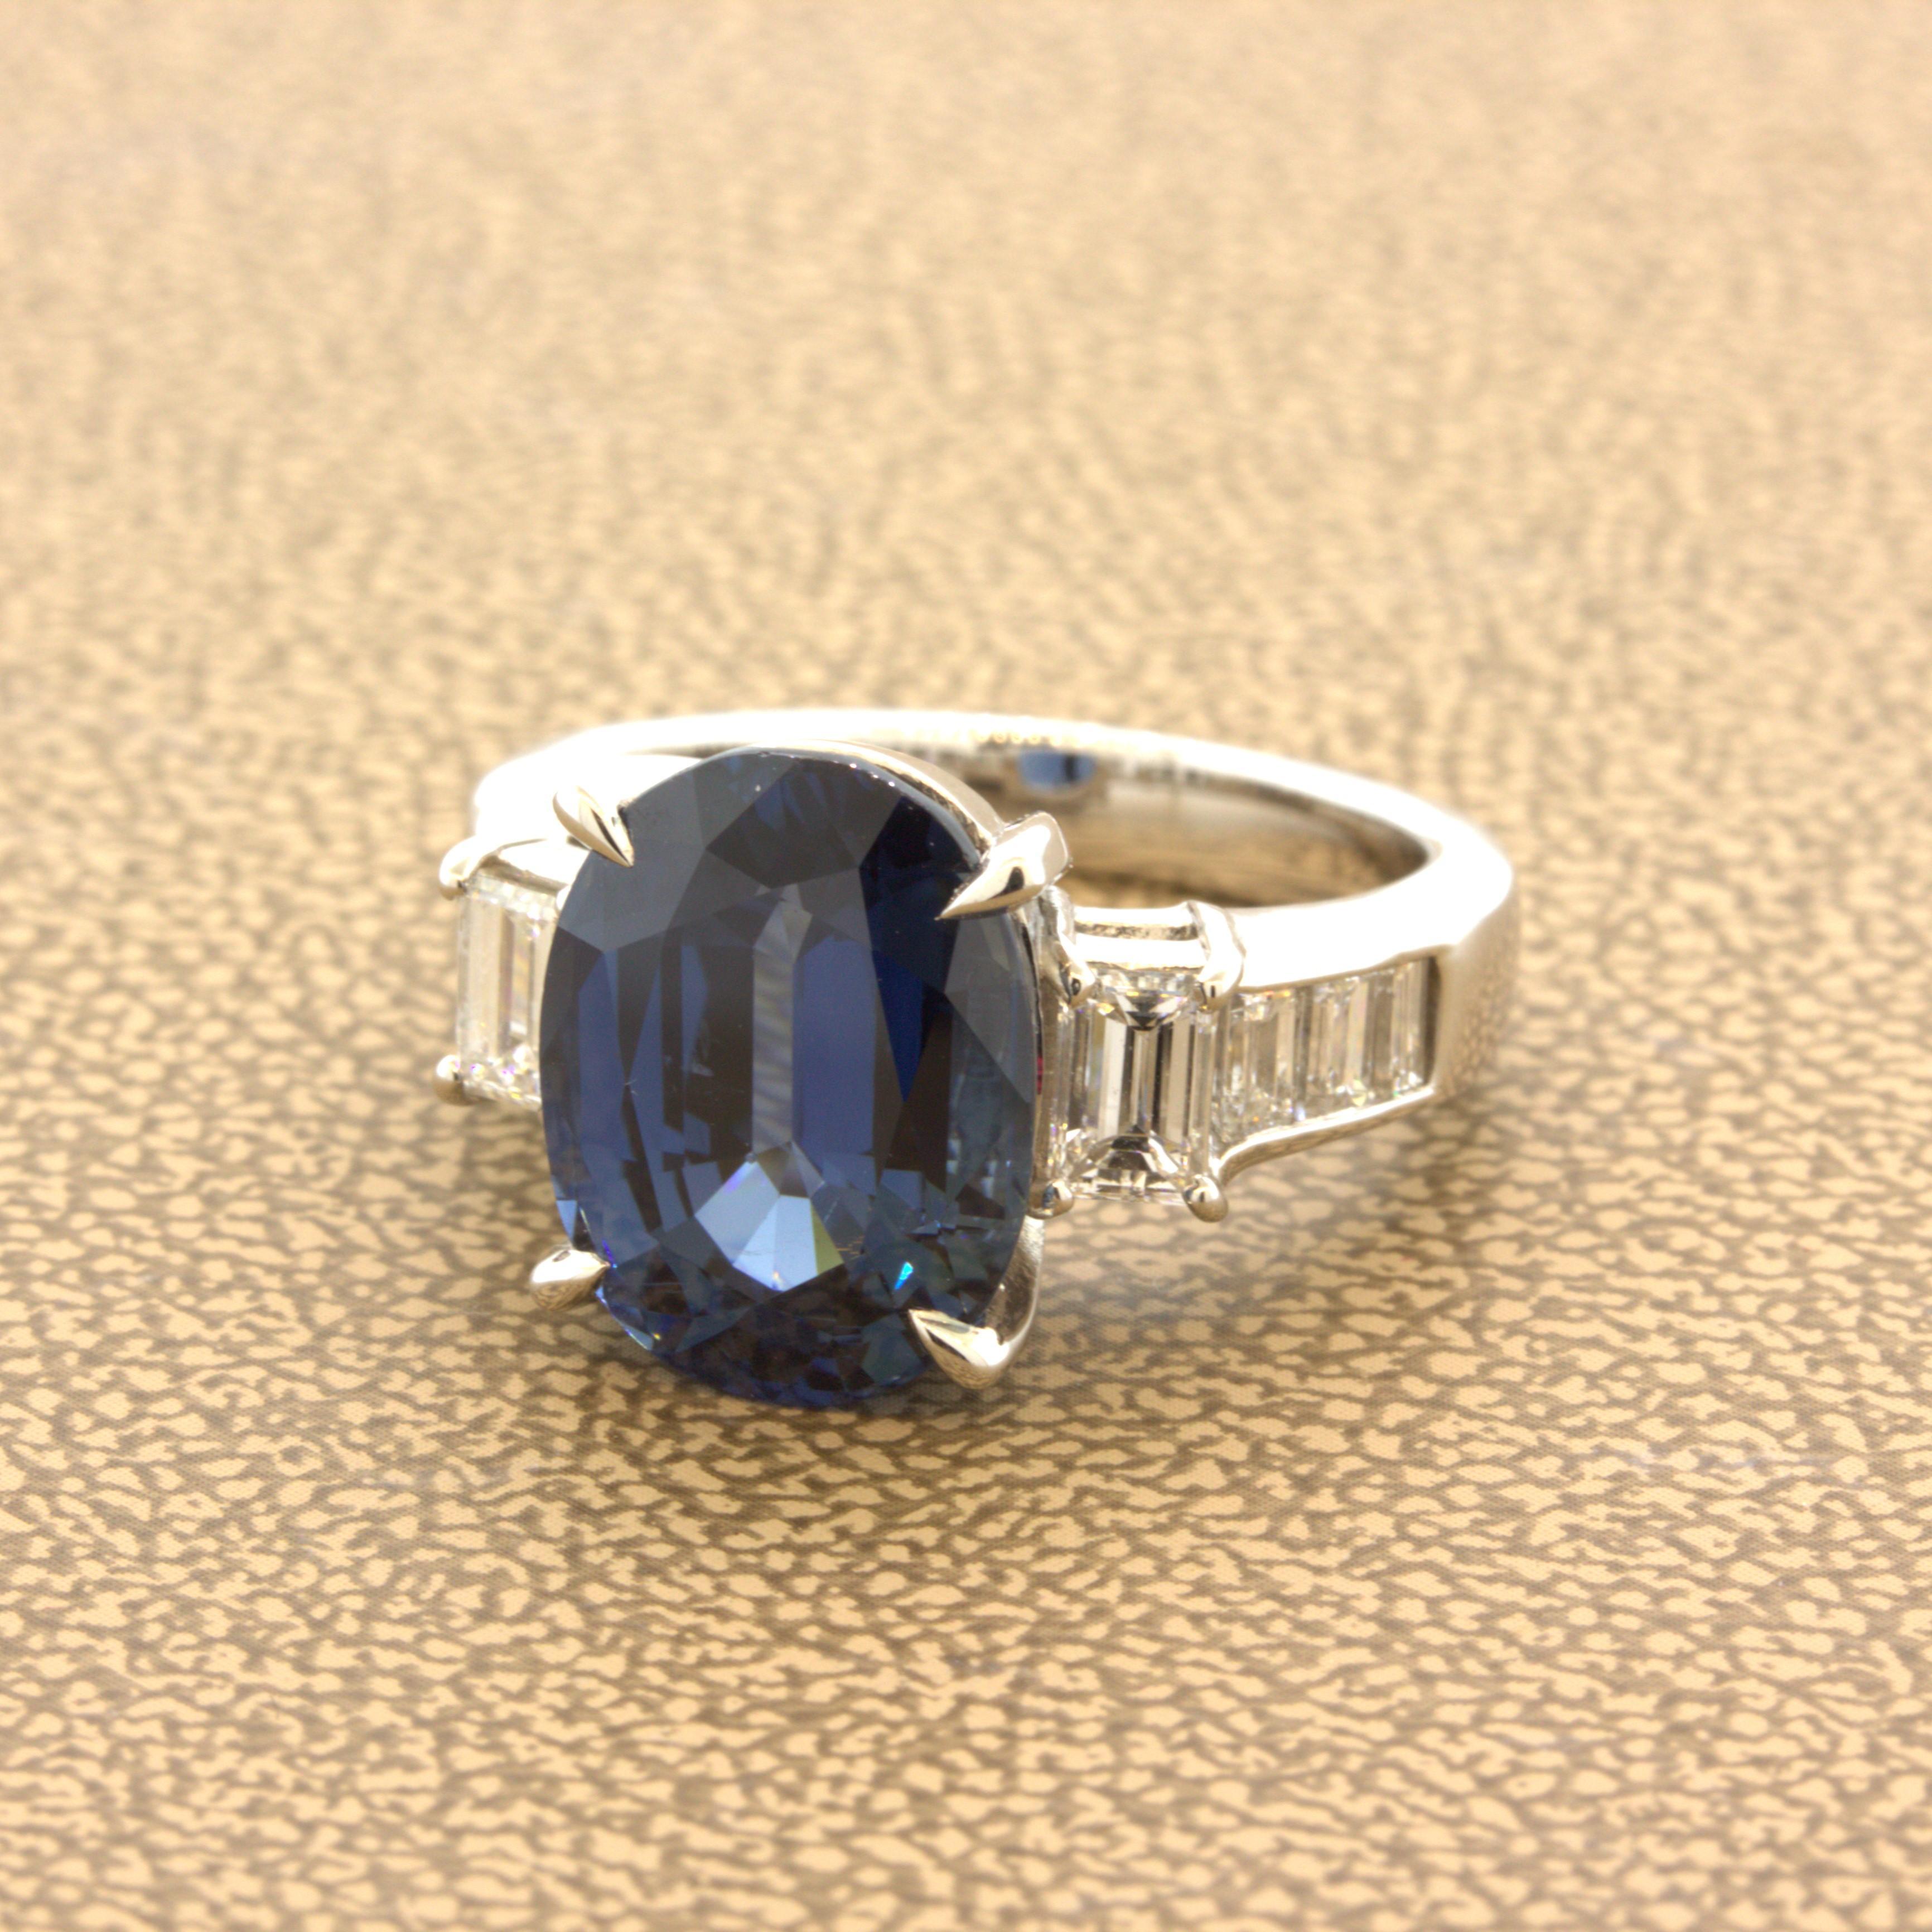 A large and impressive sapphire weighing 7.61 carats. The sapphire is certified by the GIA as natural with no treatment of any kind. It has a bright open blue color and is very clean with no visible inclusions. IT is complemented by 1.03 carats of